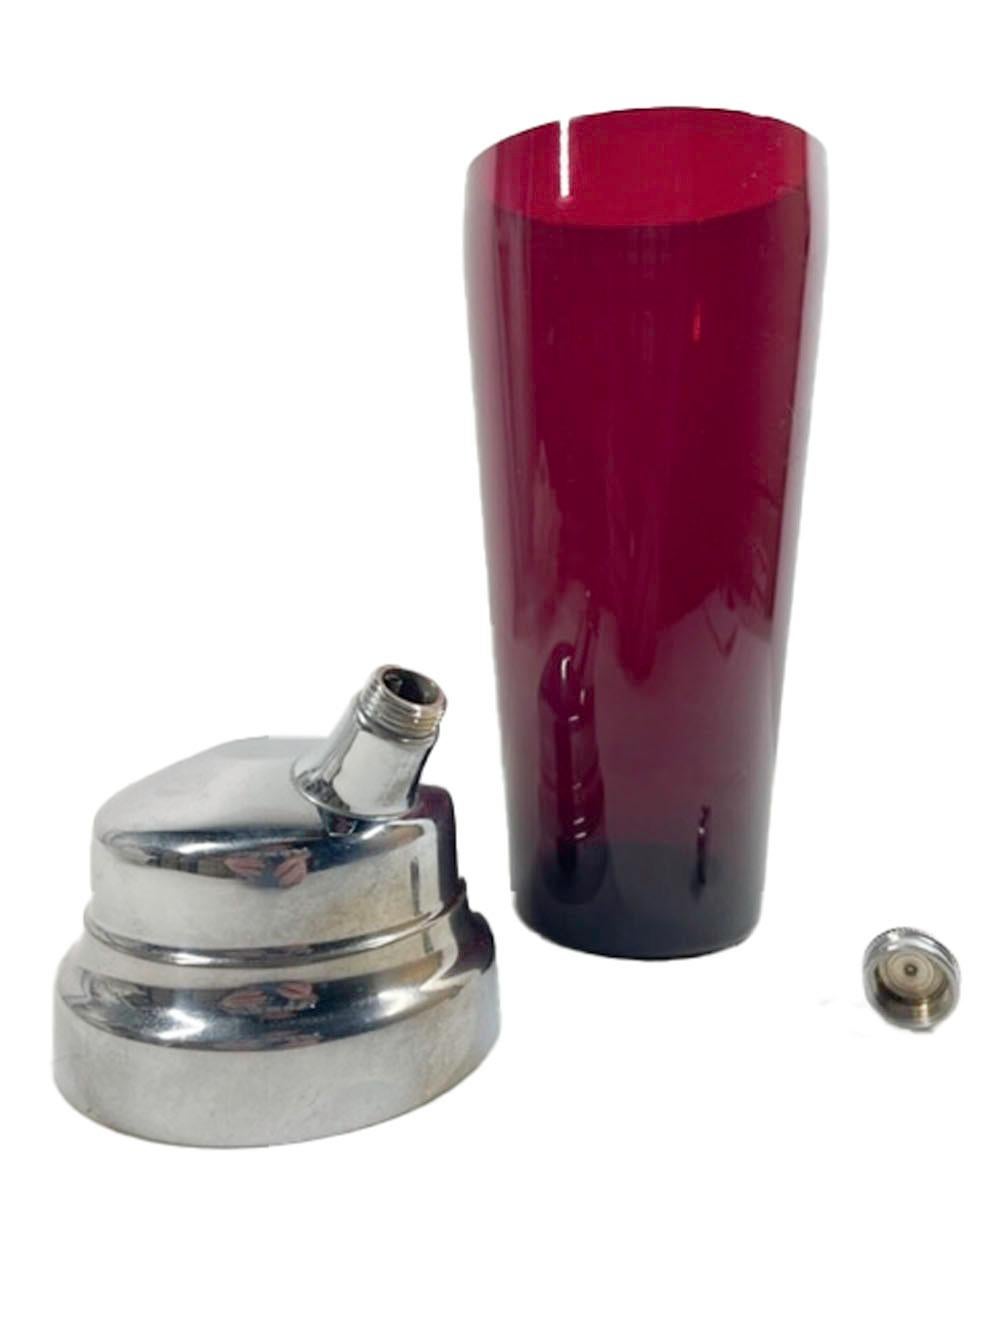 20th Century Art Deco Ruby Red Glass Cocktail Shaker with Chrome Lid and 6 Cocktail Glasses